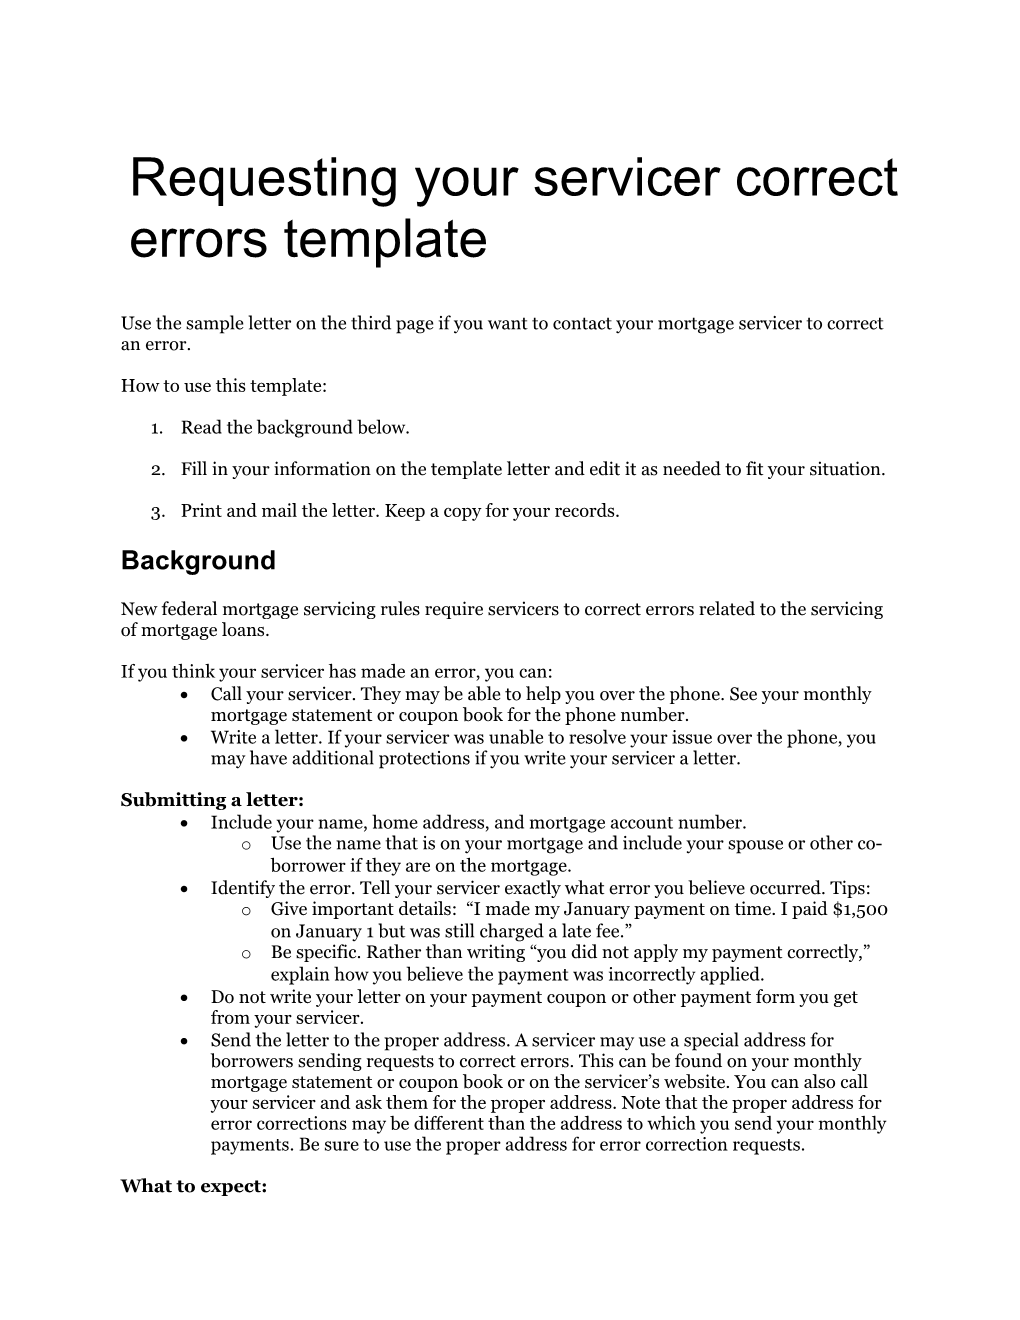 Requesting Your Servicer Correct Errorstemplate